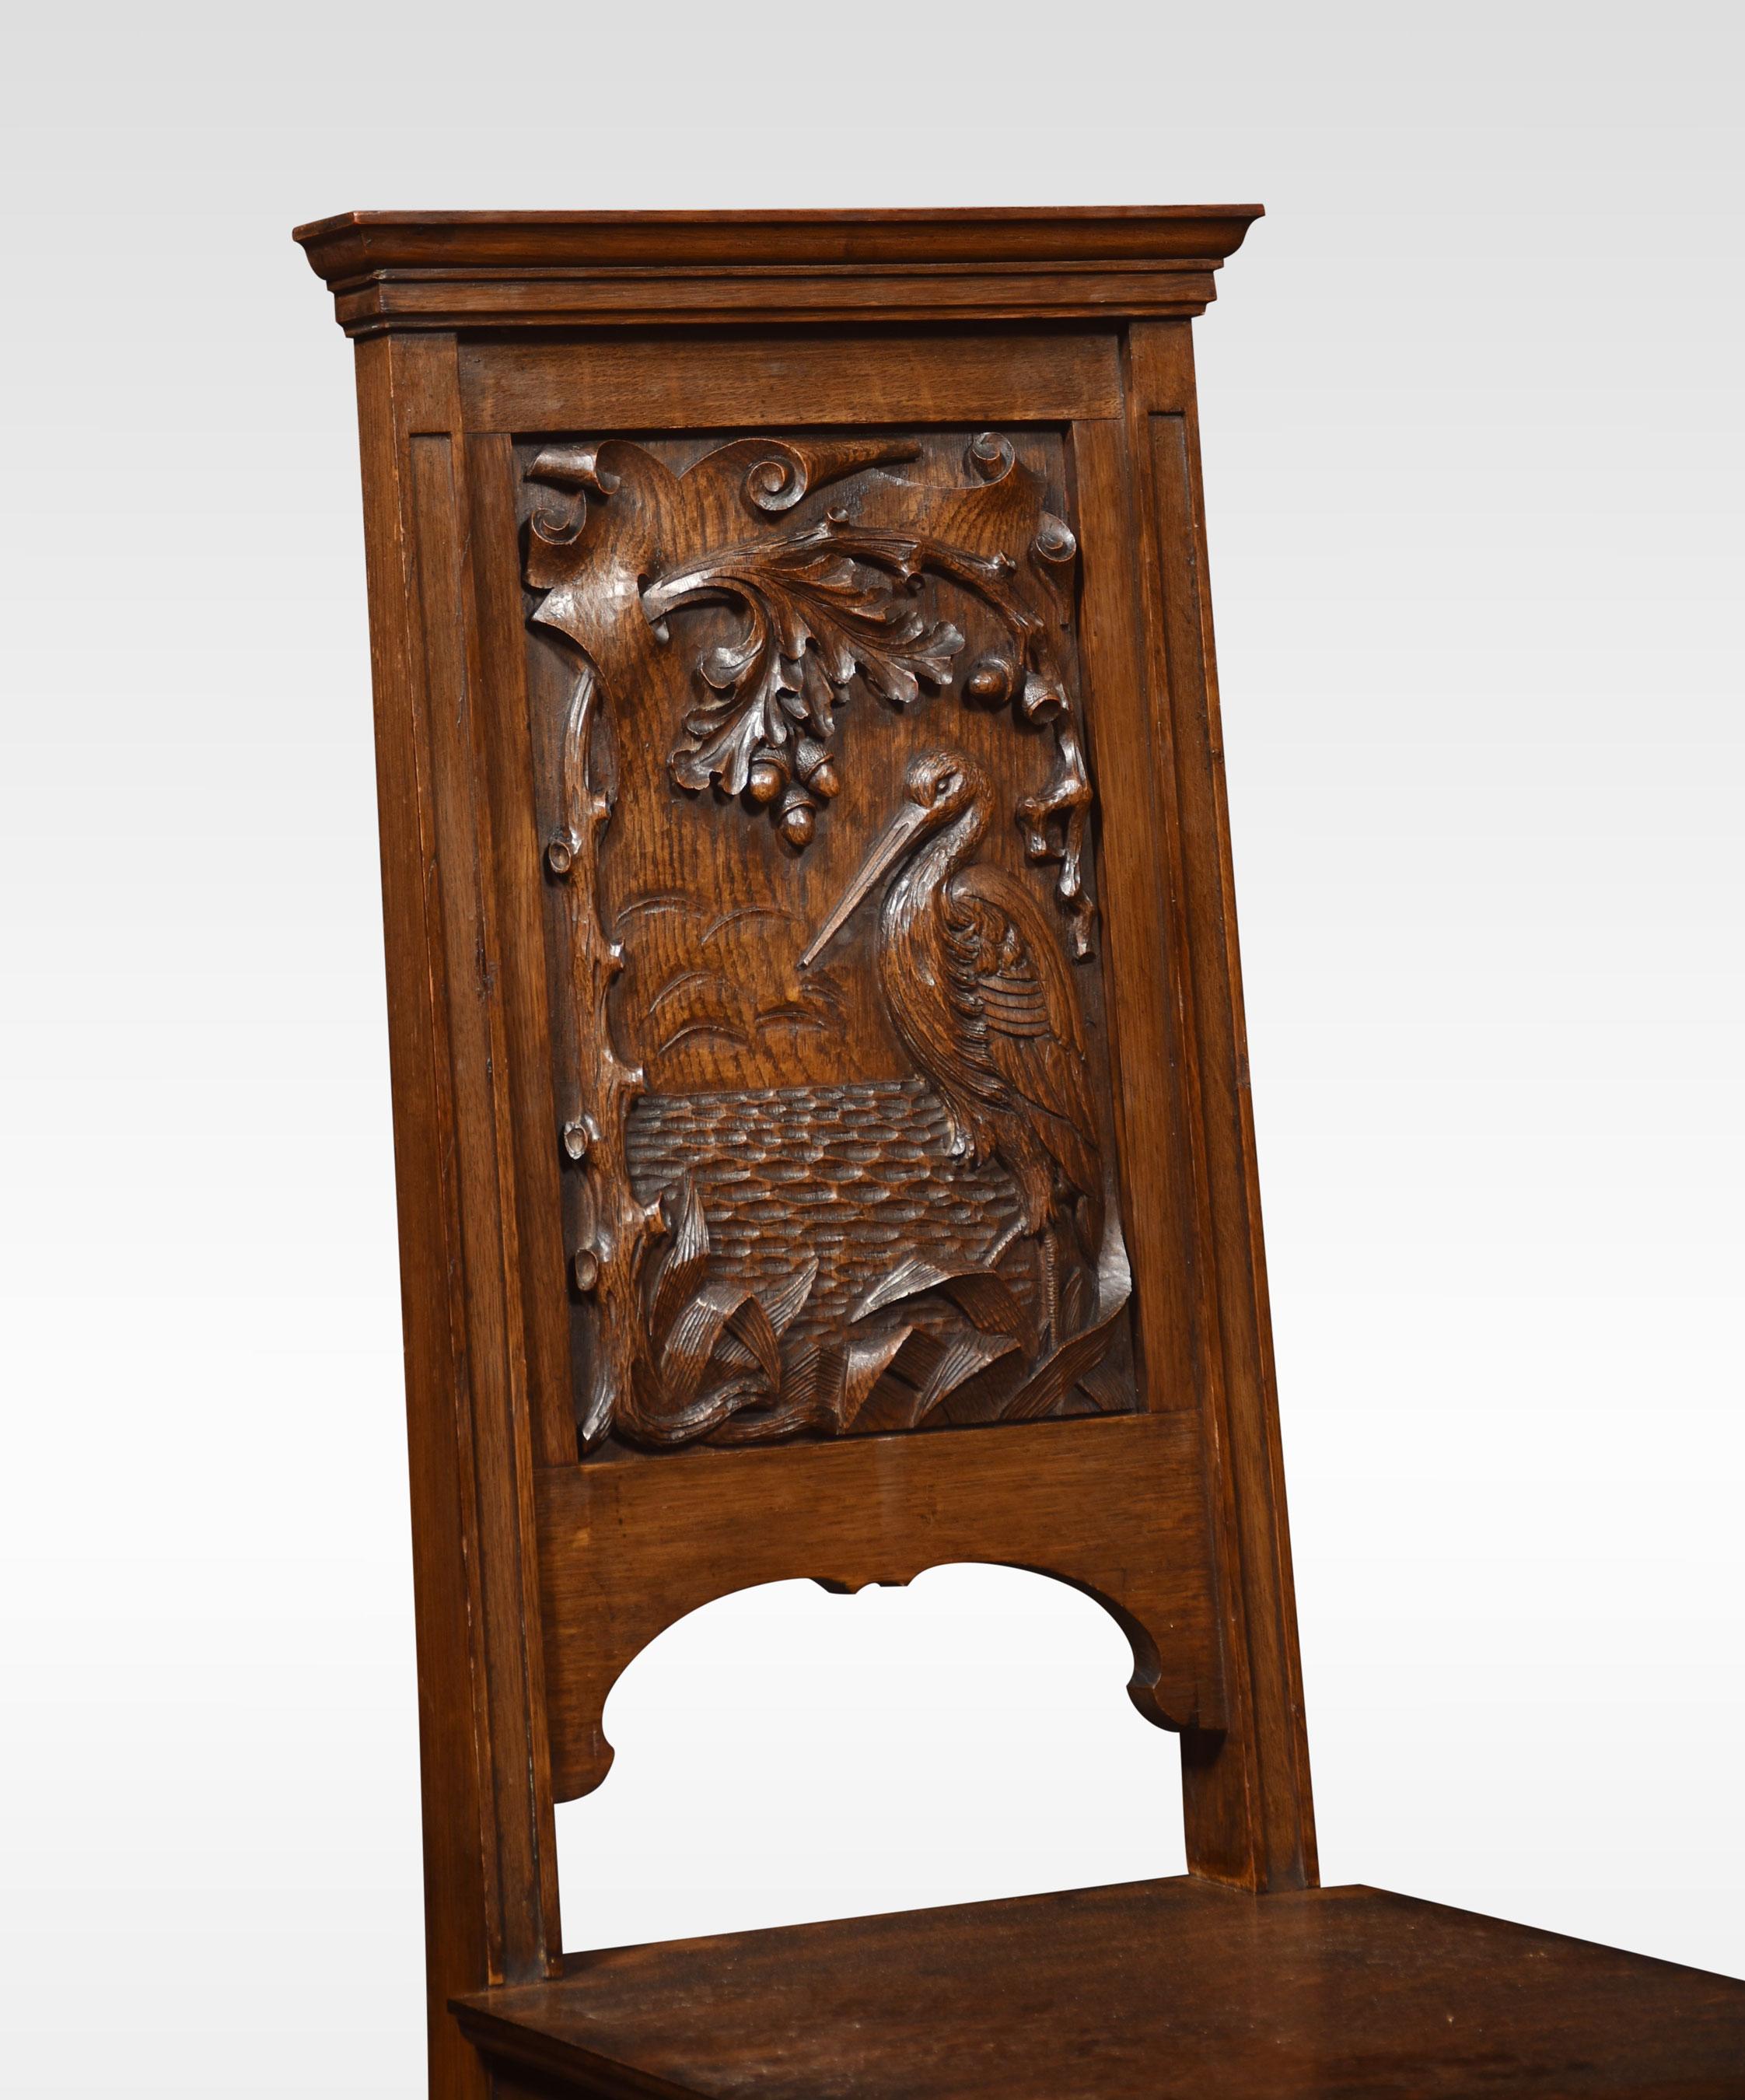 Pair of carved oak hall chairs, each having a panelled back decorated with a stork above the oak seat. Raised up on turned and blocked front legs united by stretchers.
Dimensions
Height 45 inch height to seat 18.5 inch
Width 18.5 inch
Depth 19.5